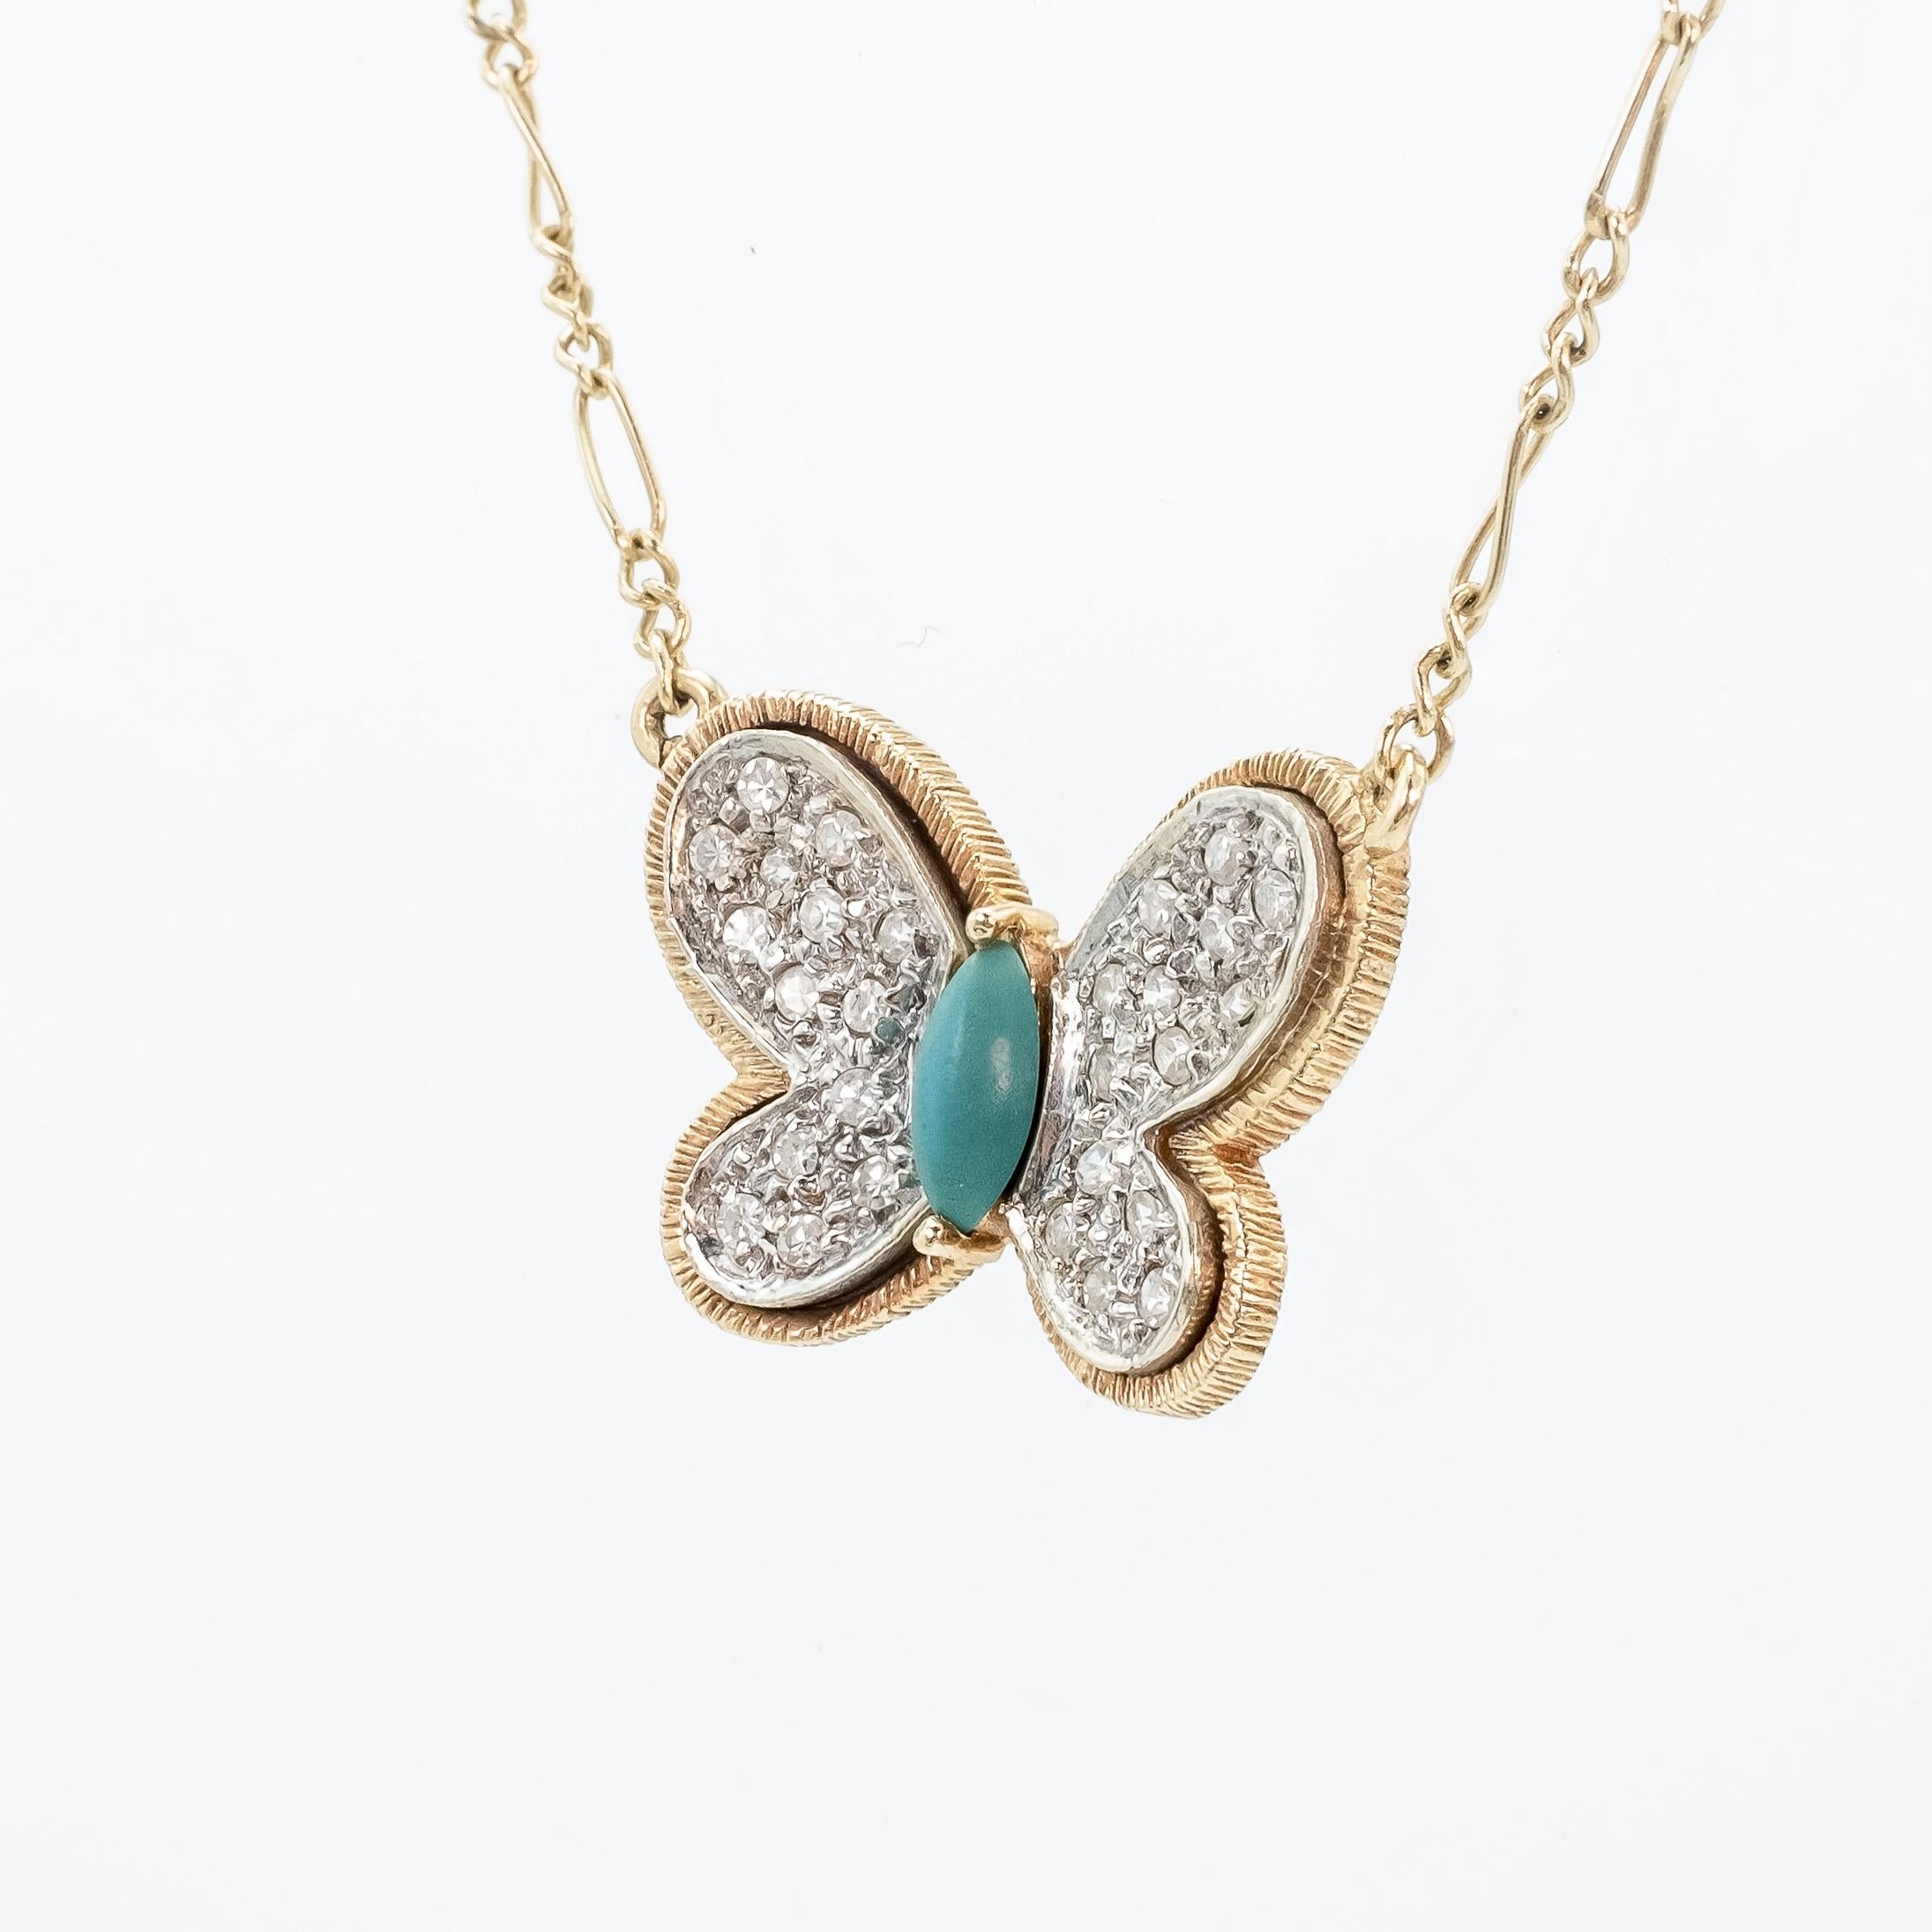 Vintage Hammerman Brothers Butterfly Necklace with Turquoise, Diamonds & Figaro In Good Condition For Sale In Fairfield, CT